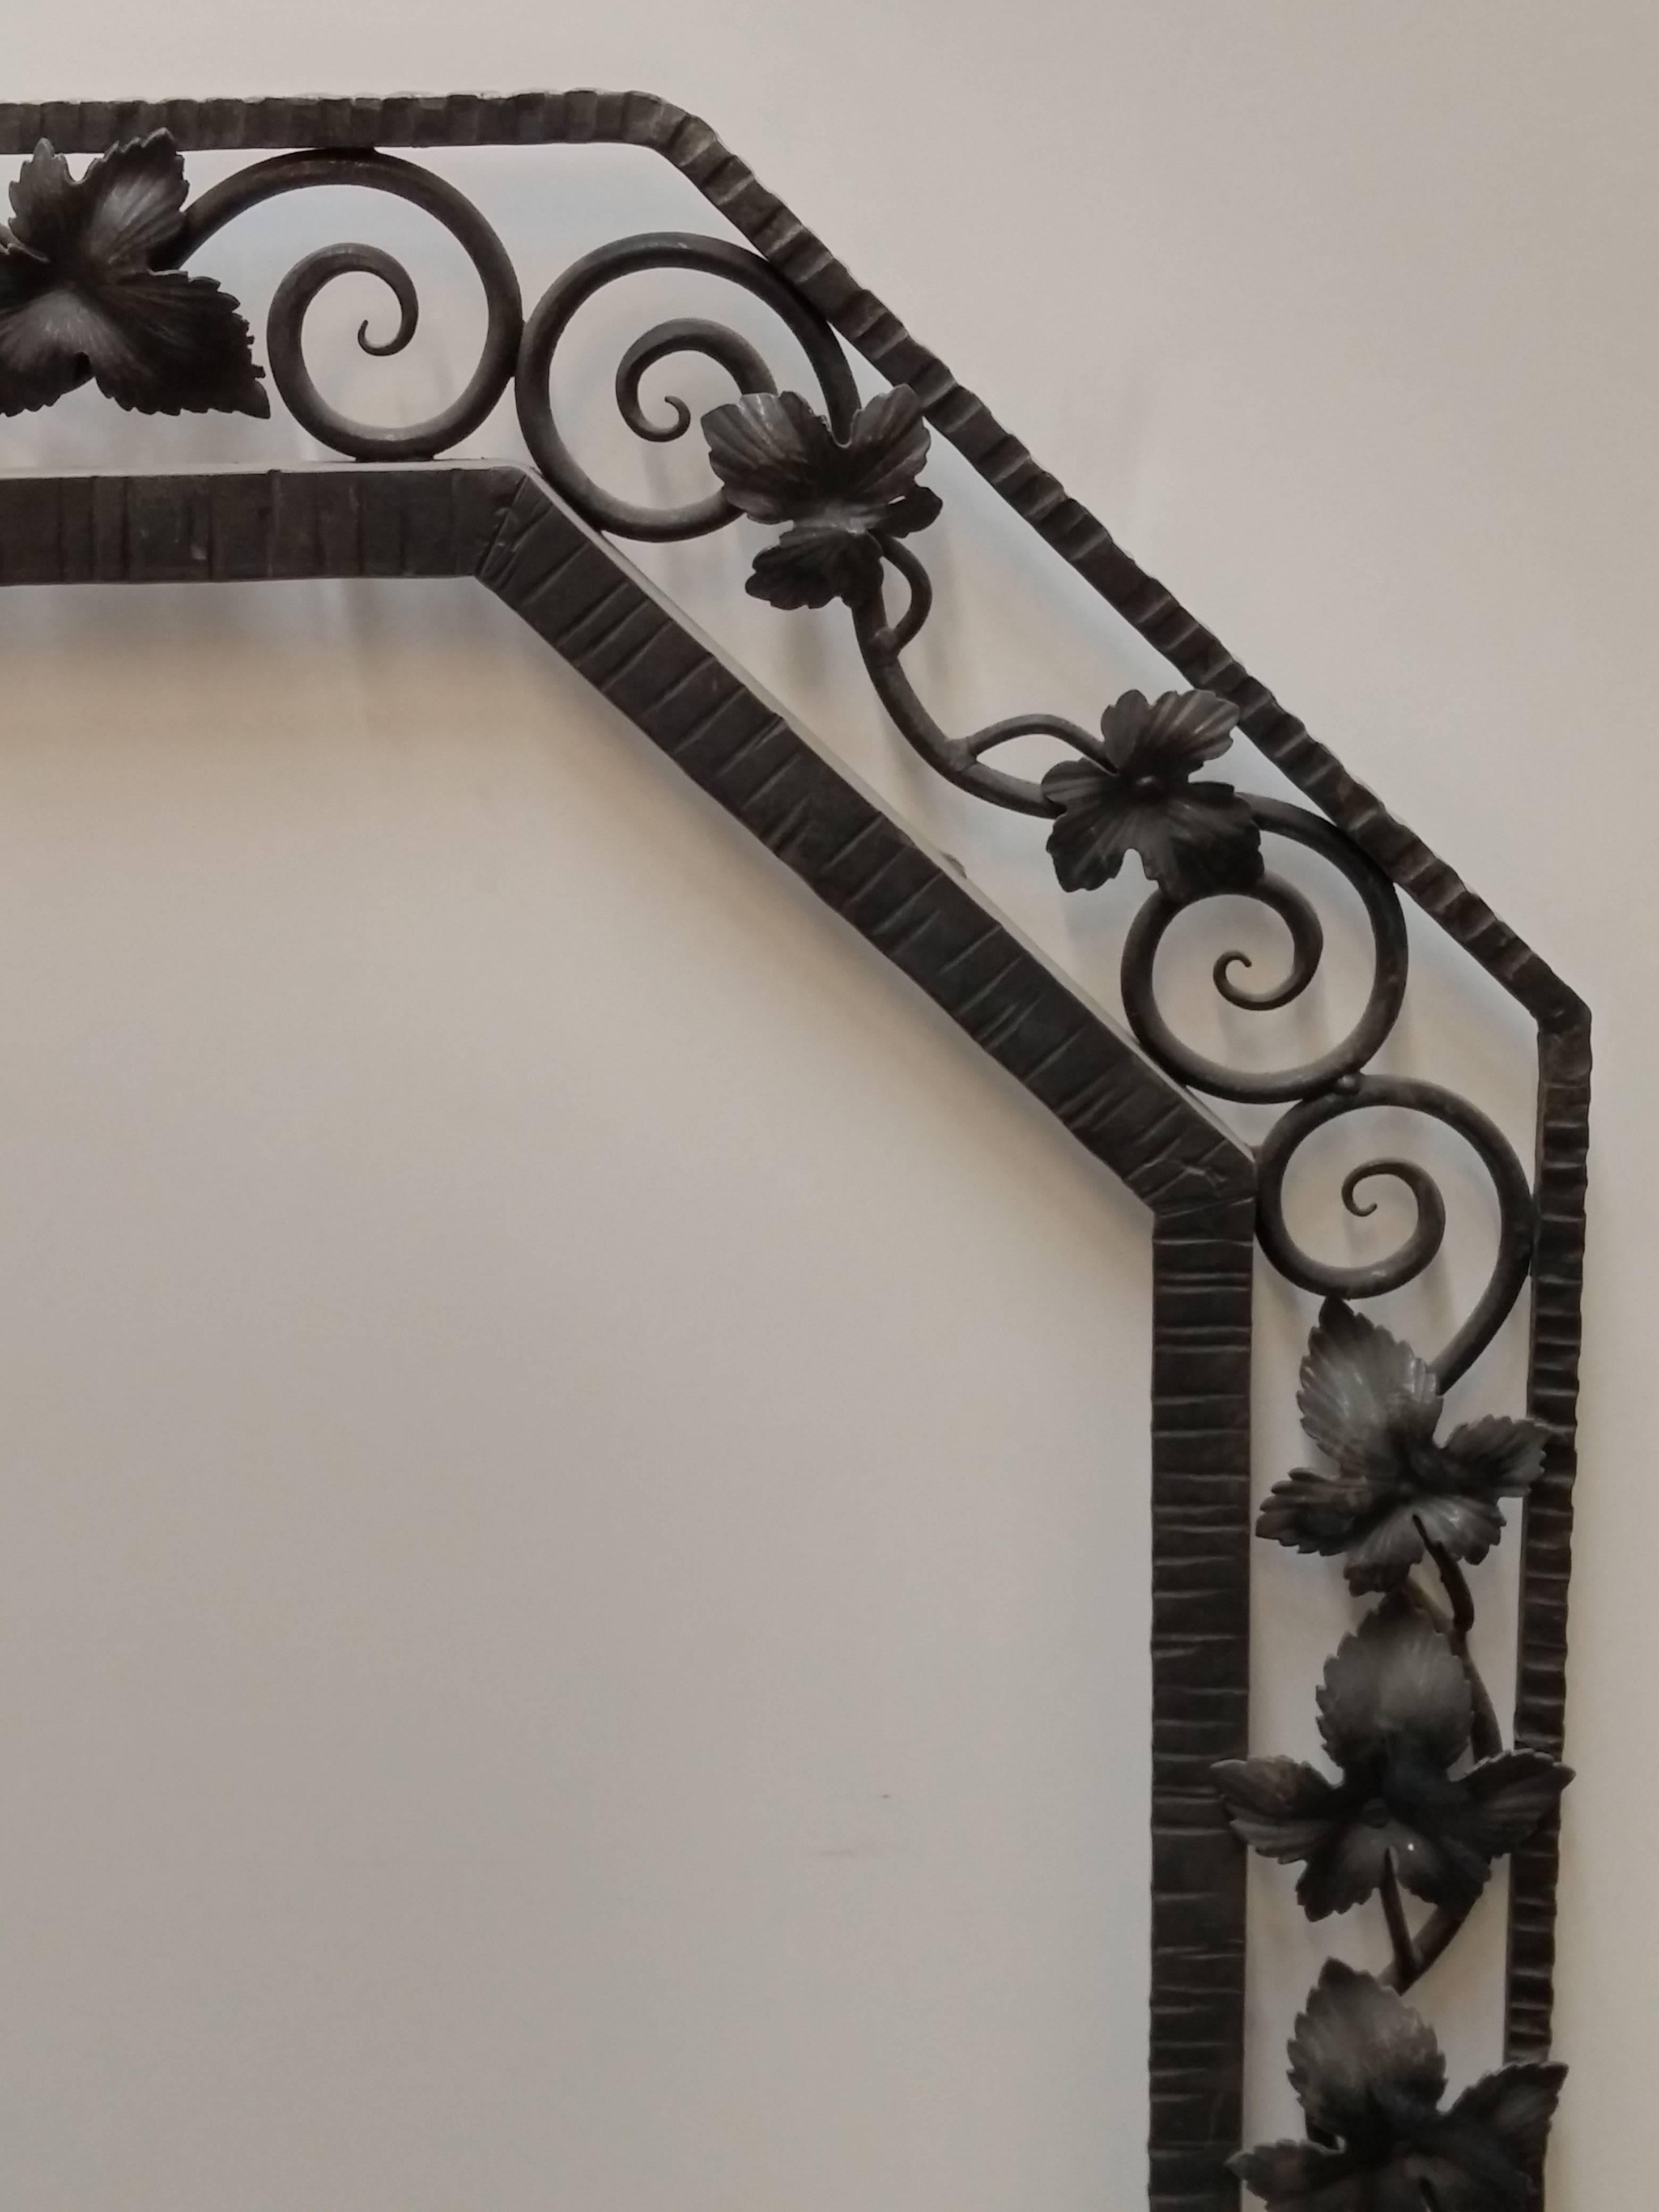 French Art Deco wrought iron mirror with hand-forged grapevine motifs. The frame will be accommodated with a beveled mirror. Pair available. Re-plating in different finishes upon request. Complimentary drop-off to the tri-state area. We are the rare